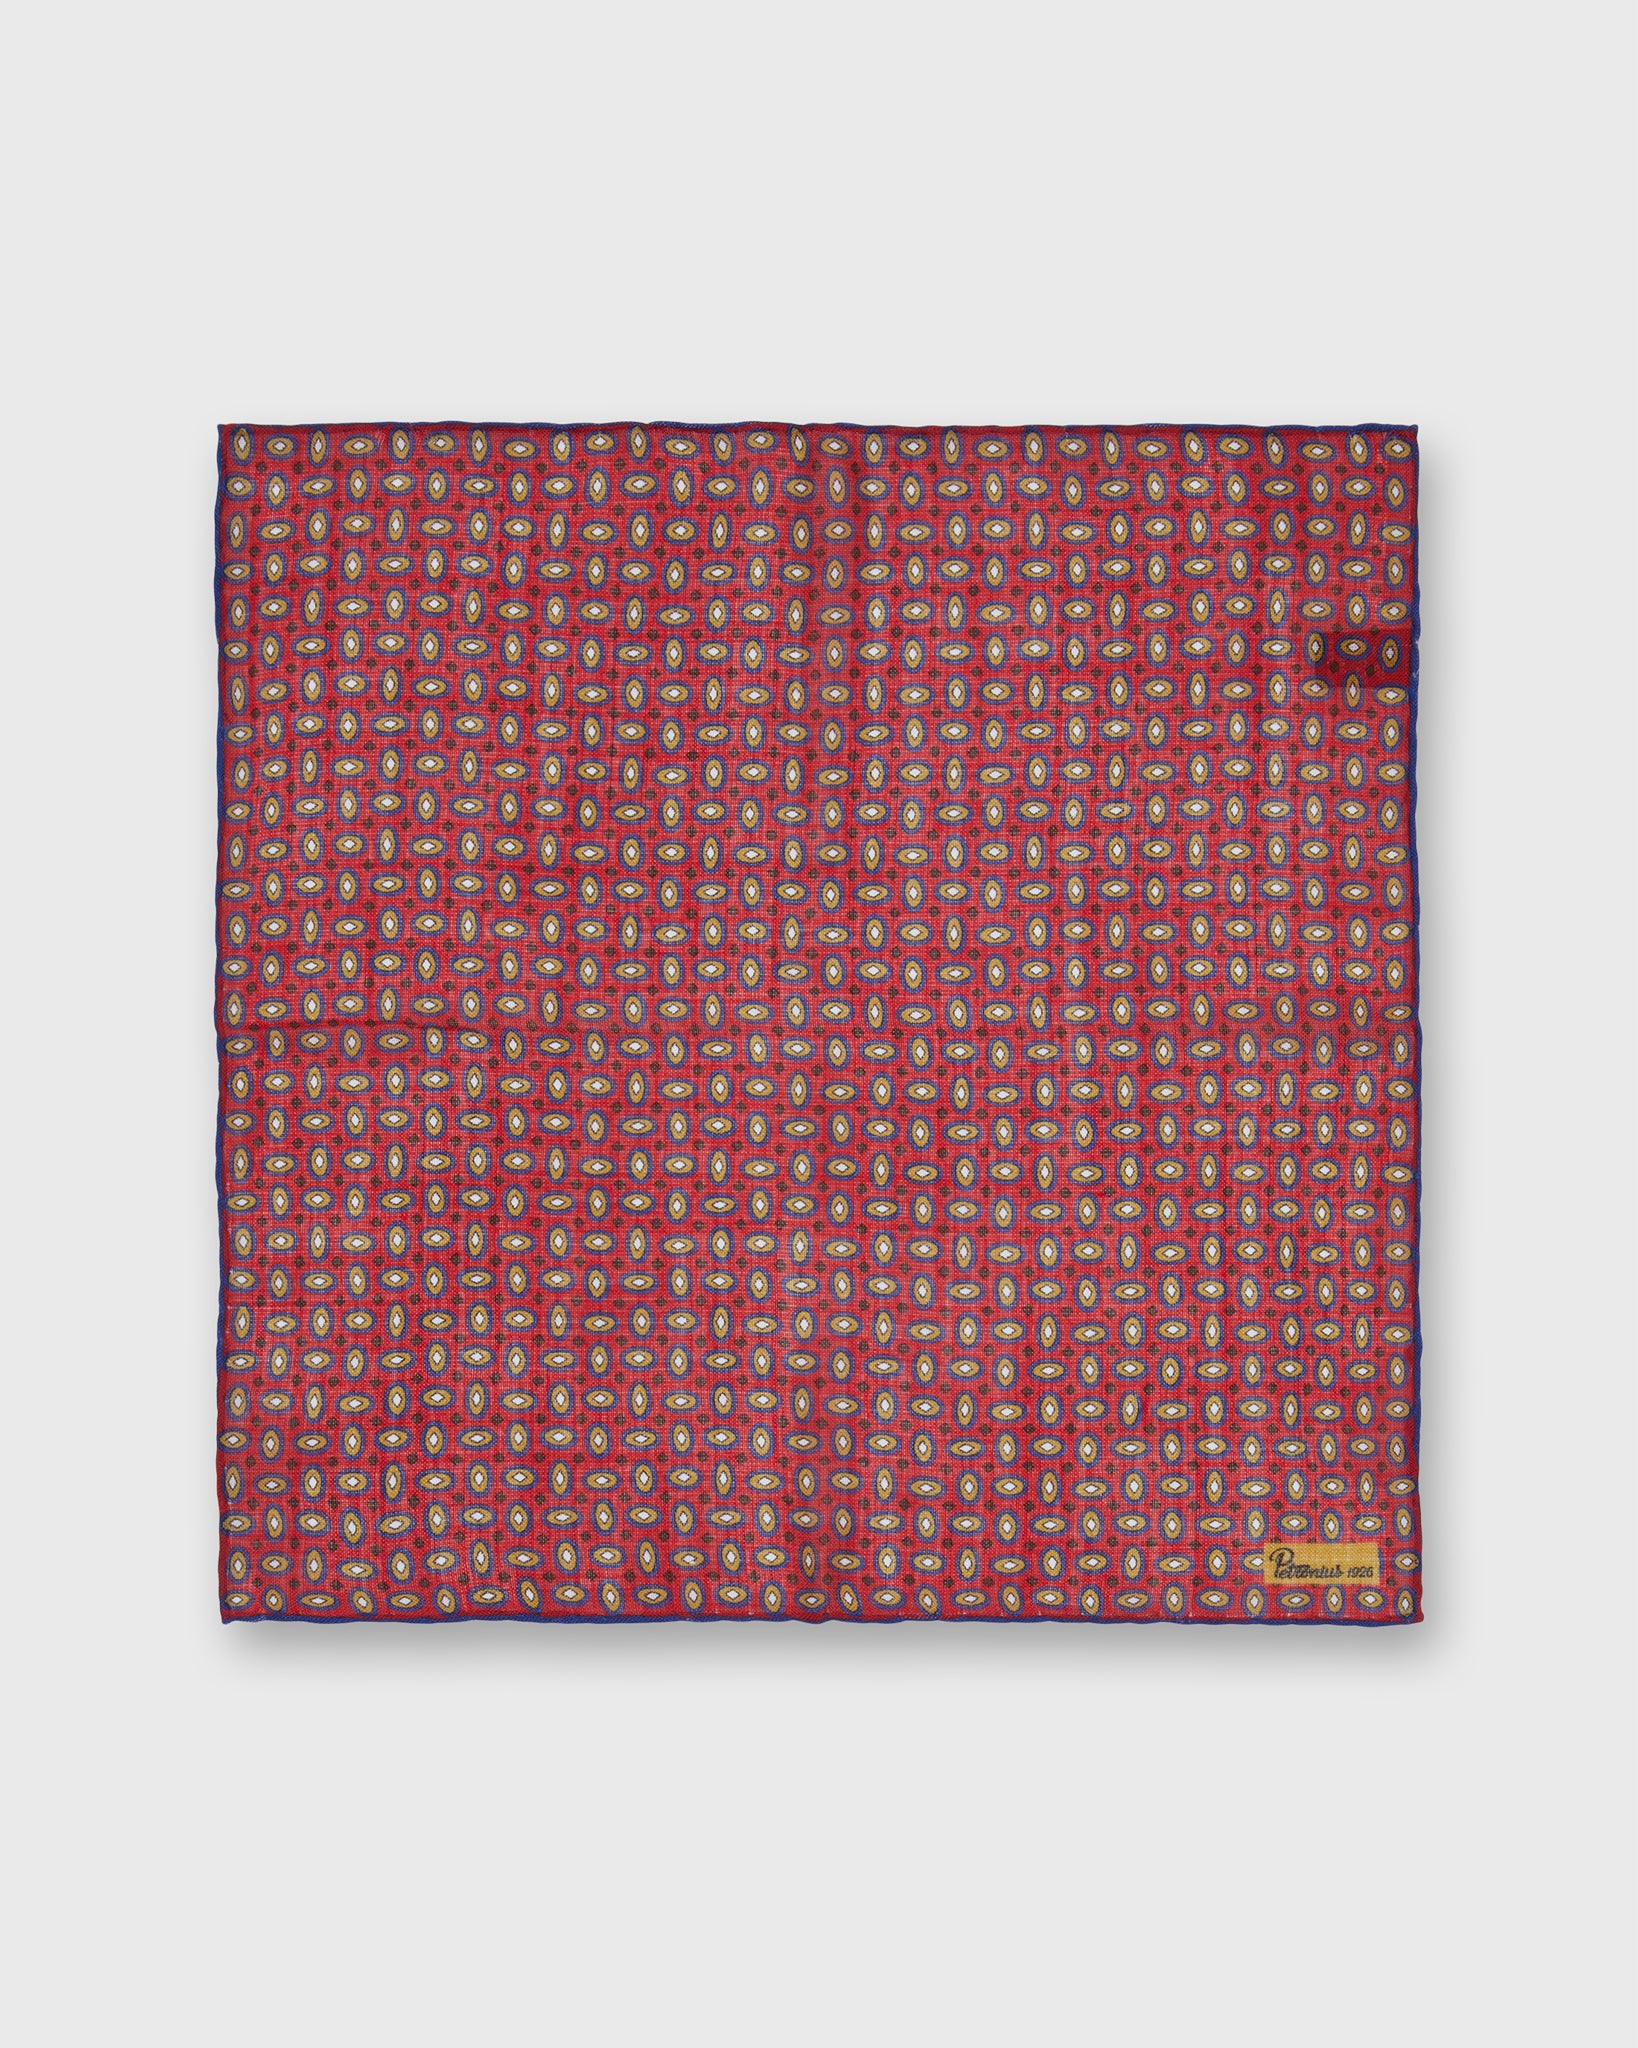 Wool/Silk Pocket Square in Red Oval Abstract